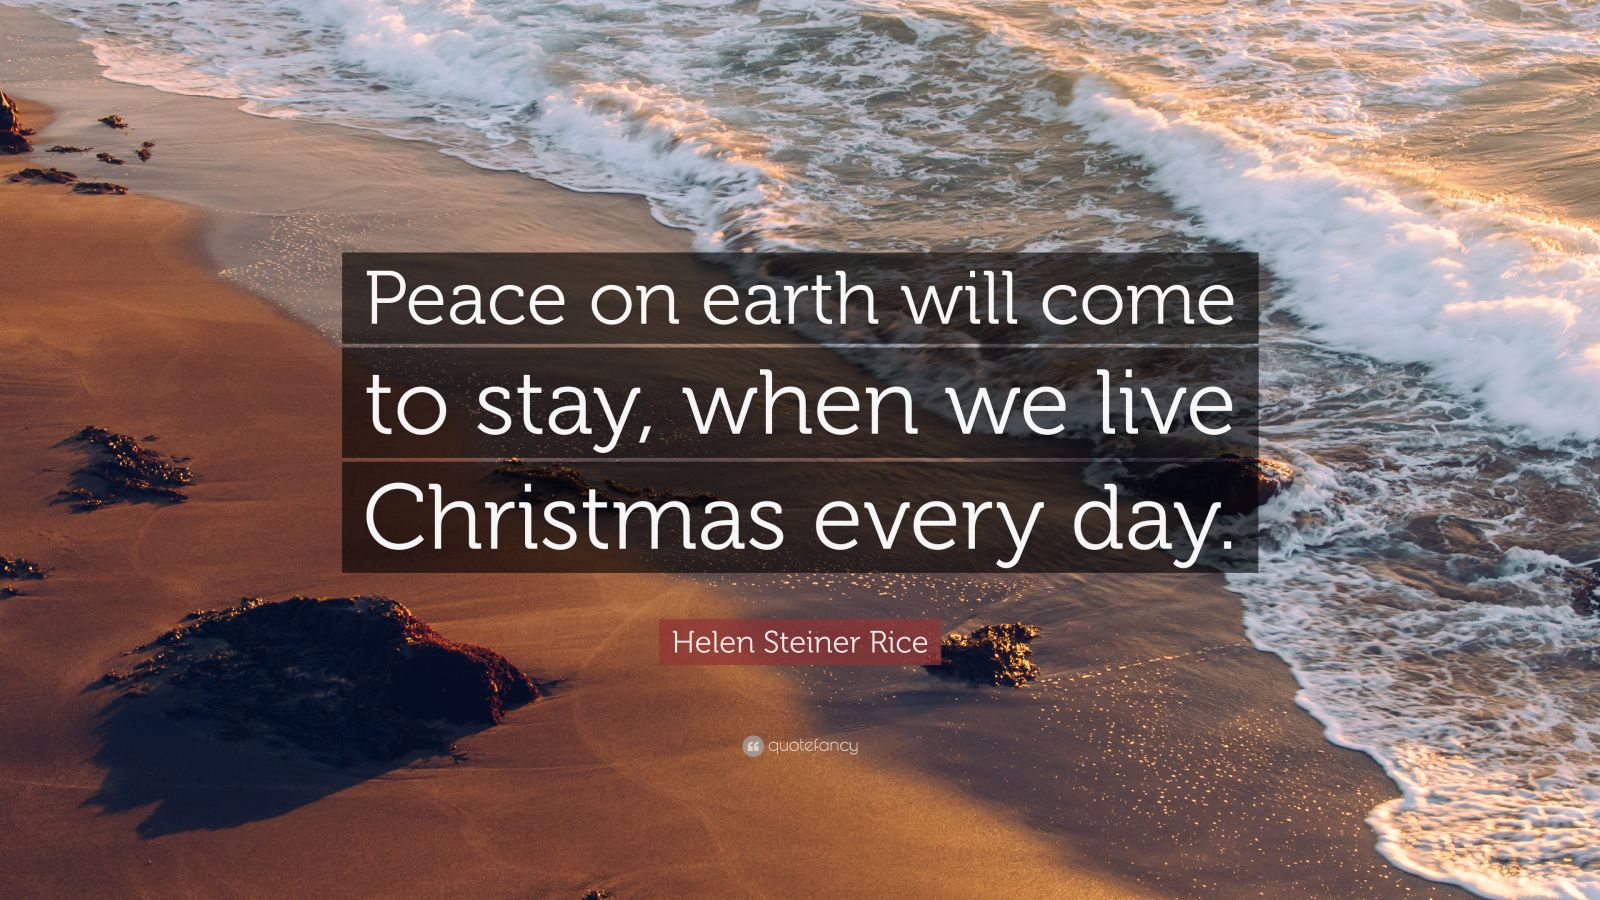 Helen Steiner Rice Quote: “Peace on earth will come to stay, when we ...